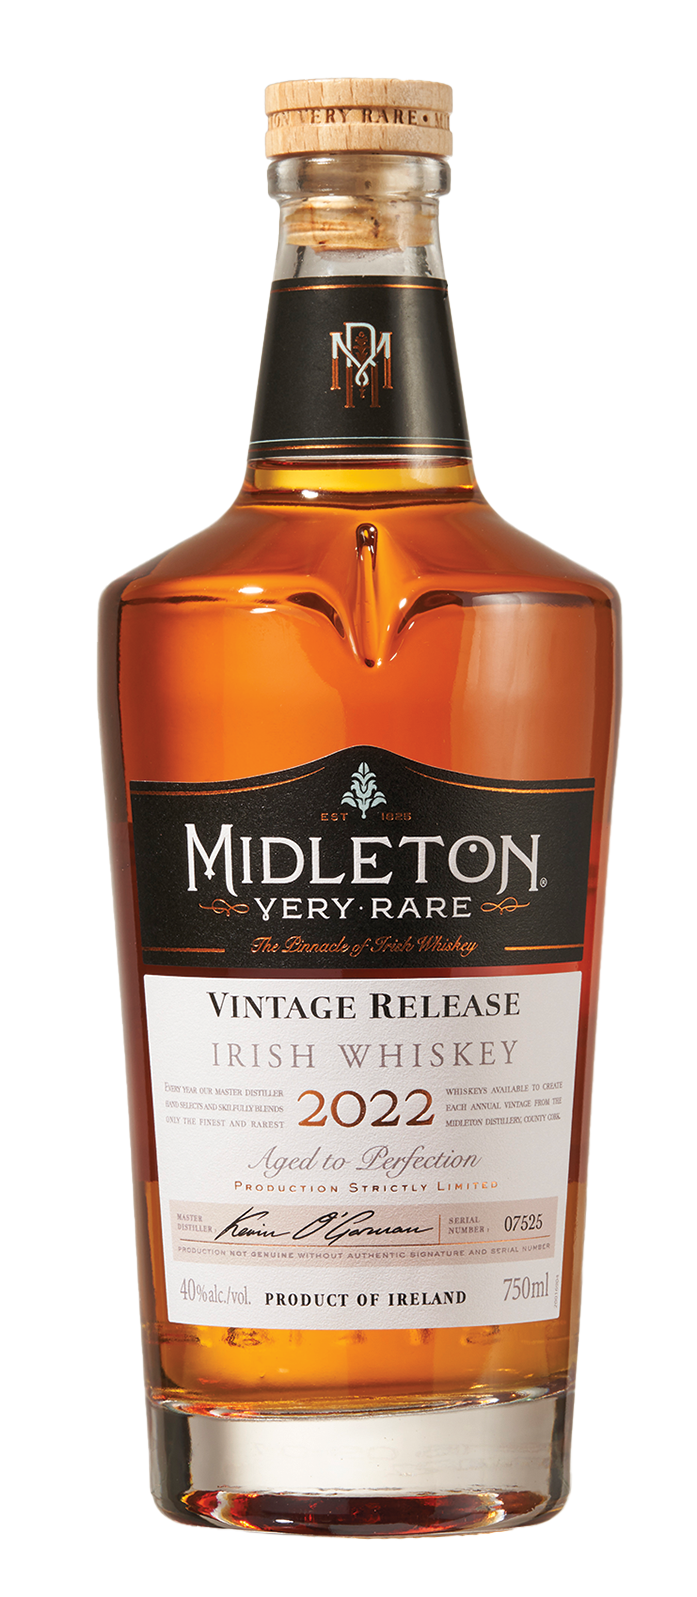 Top6 Wa0422 Midleton The 10 Best Whiskeys Of 2022, According To 'Whisky Advocate'